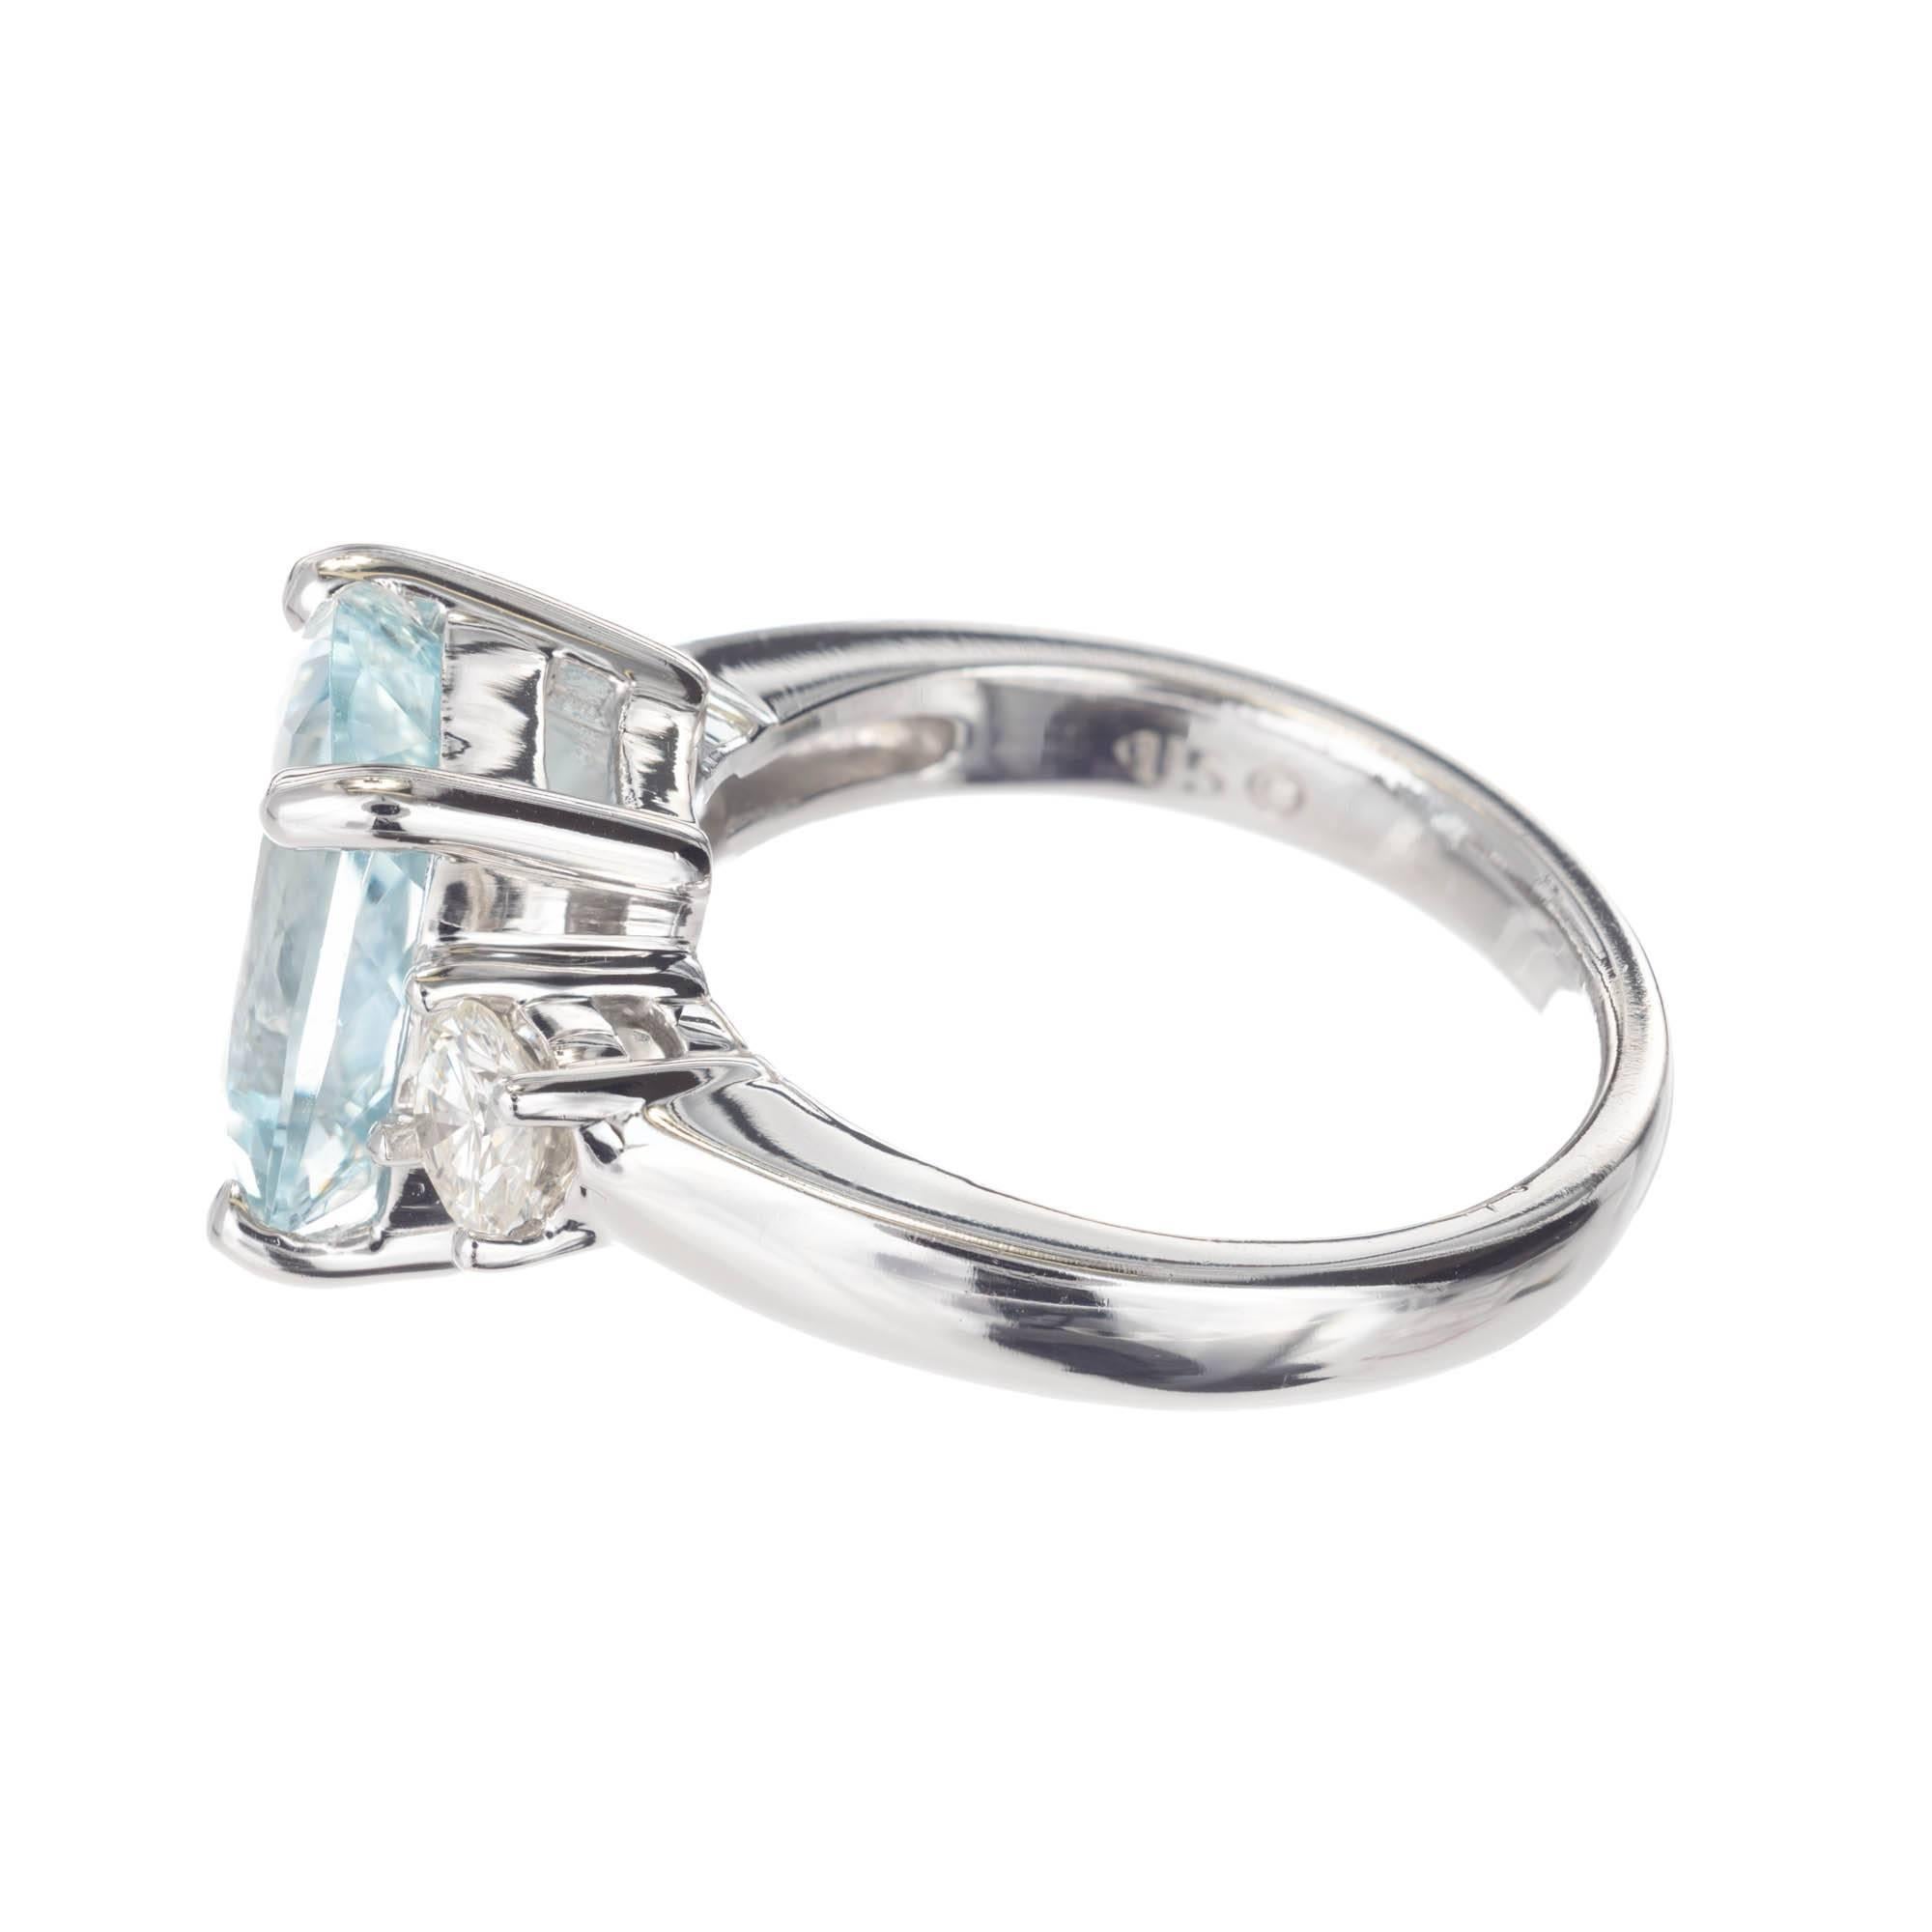 Natural blue bright well cut Aqua and diamond engagement ring 3.97 carats in a solid white gold settings with two round side accent diamonds. Circa 1980. The auqa has a  slight greenish hue .

1 cushion bright greenish blue Aqua, approximate total